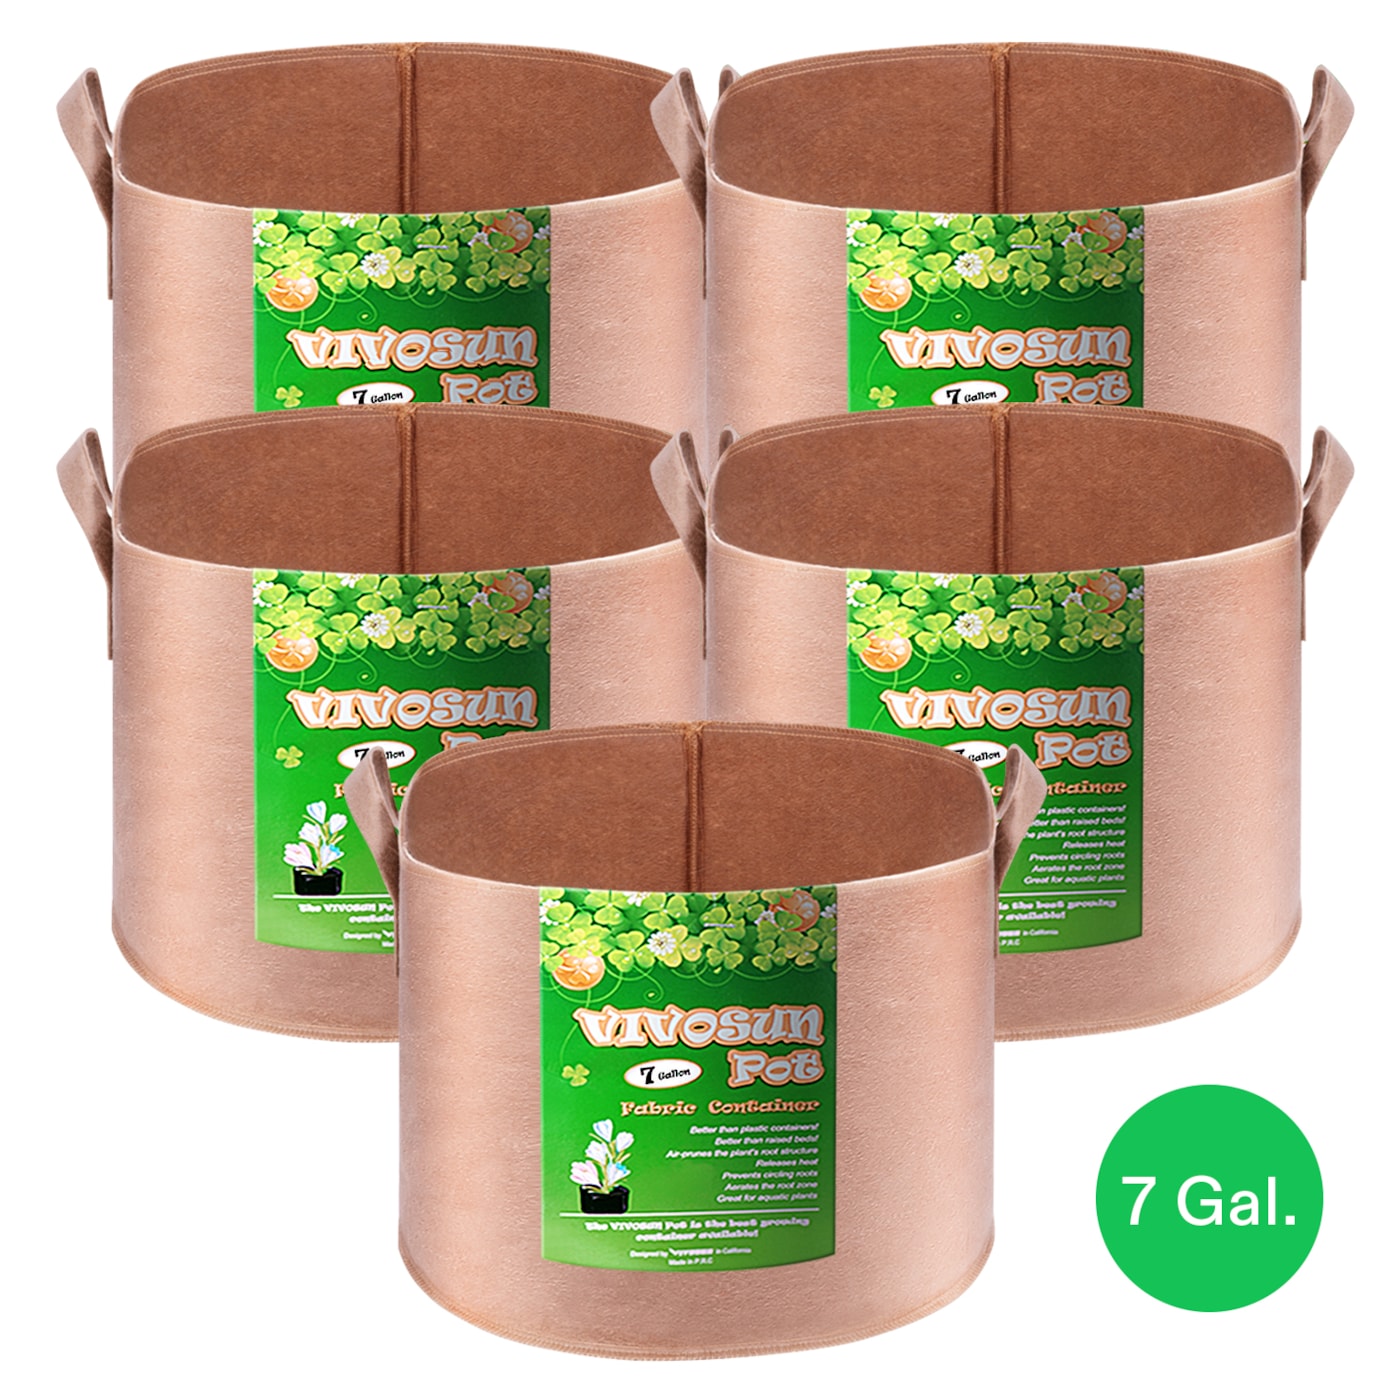 VIVOSUN 7 Gallon Grow Bags 5-Pack Brown Thickened Nonwoven Fabric Pots with Handles